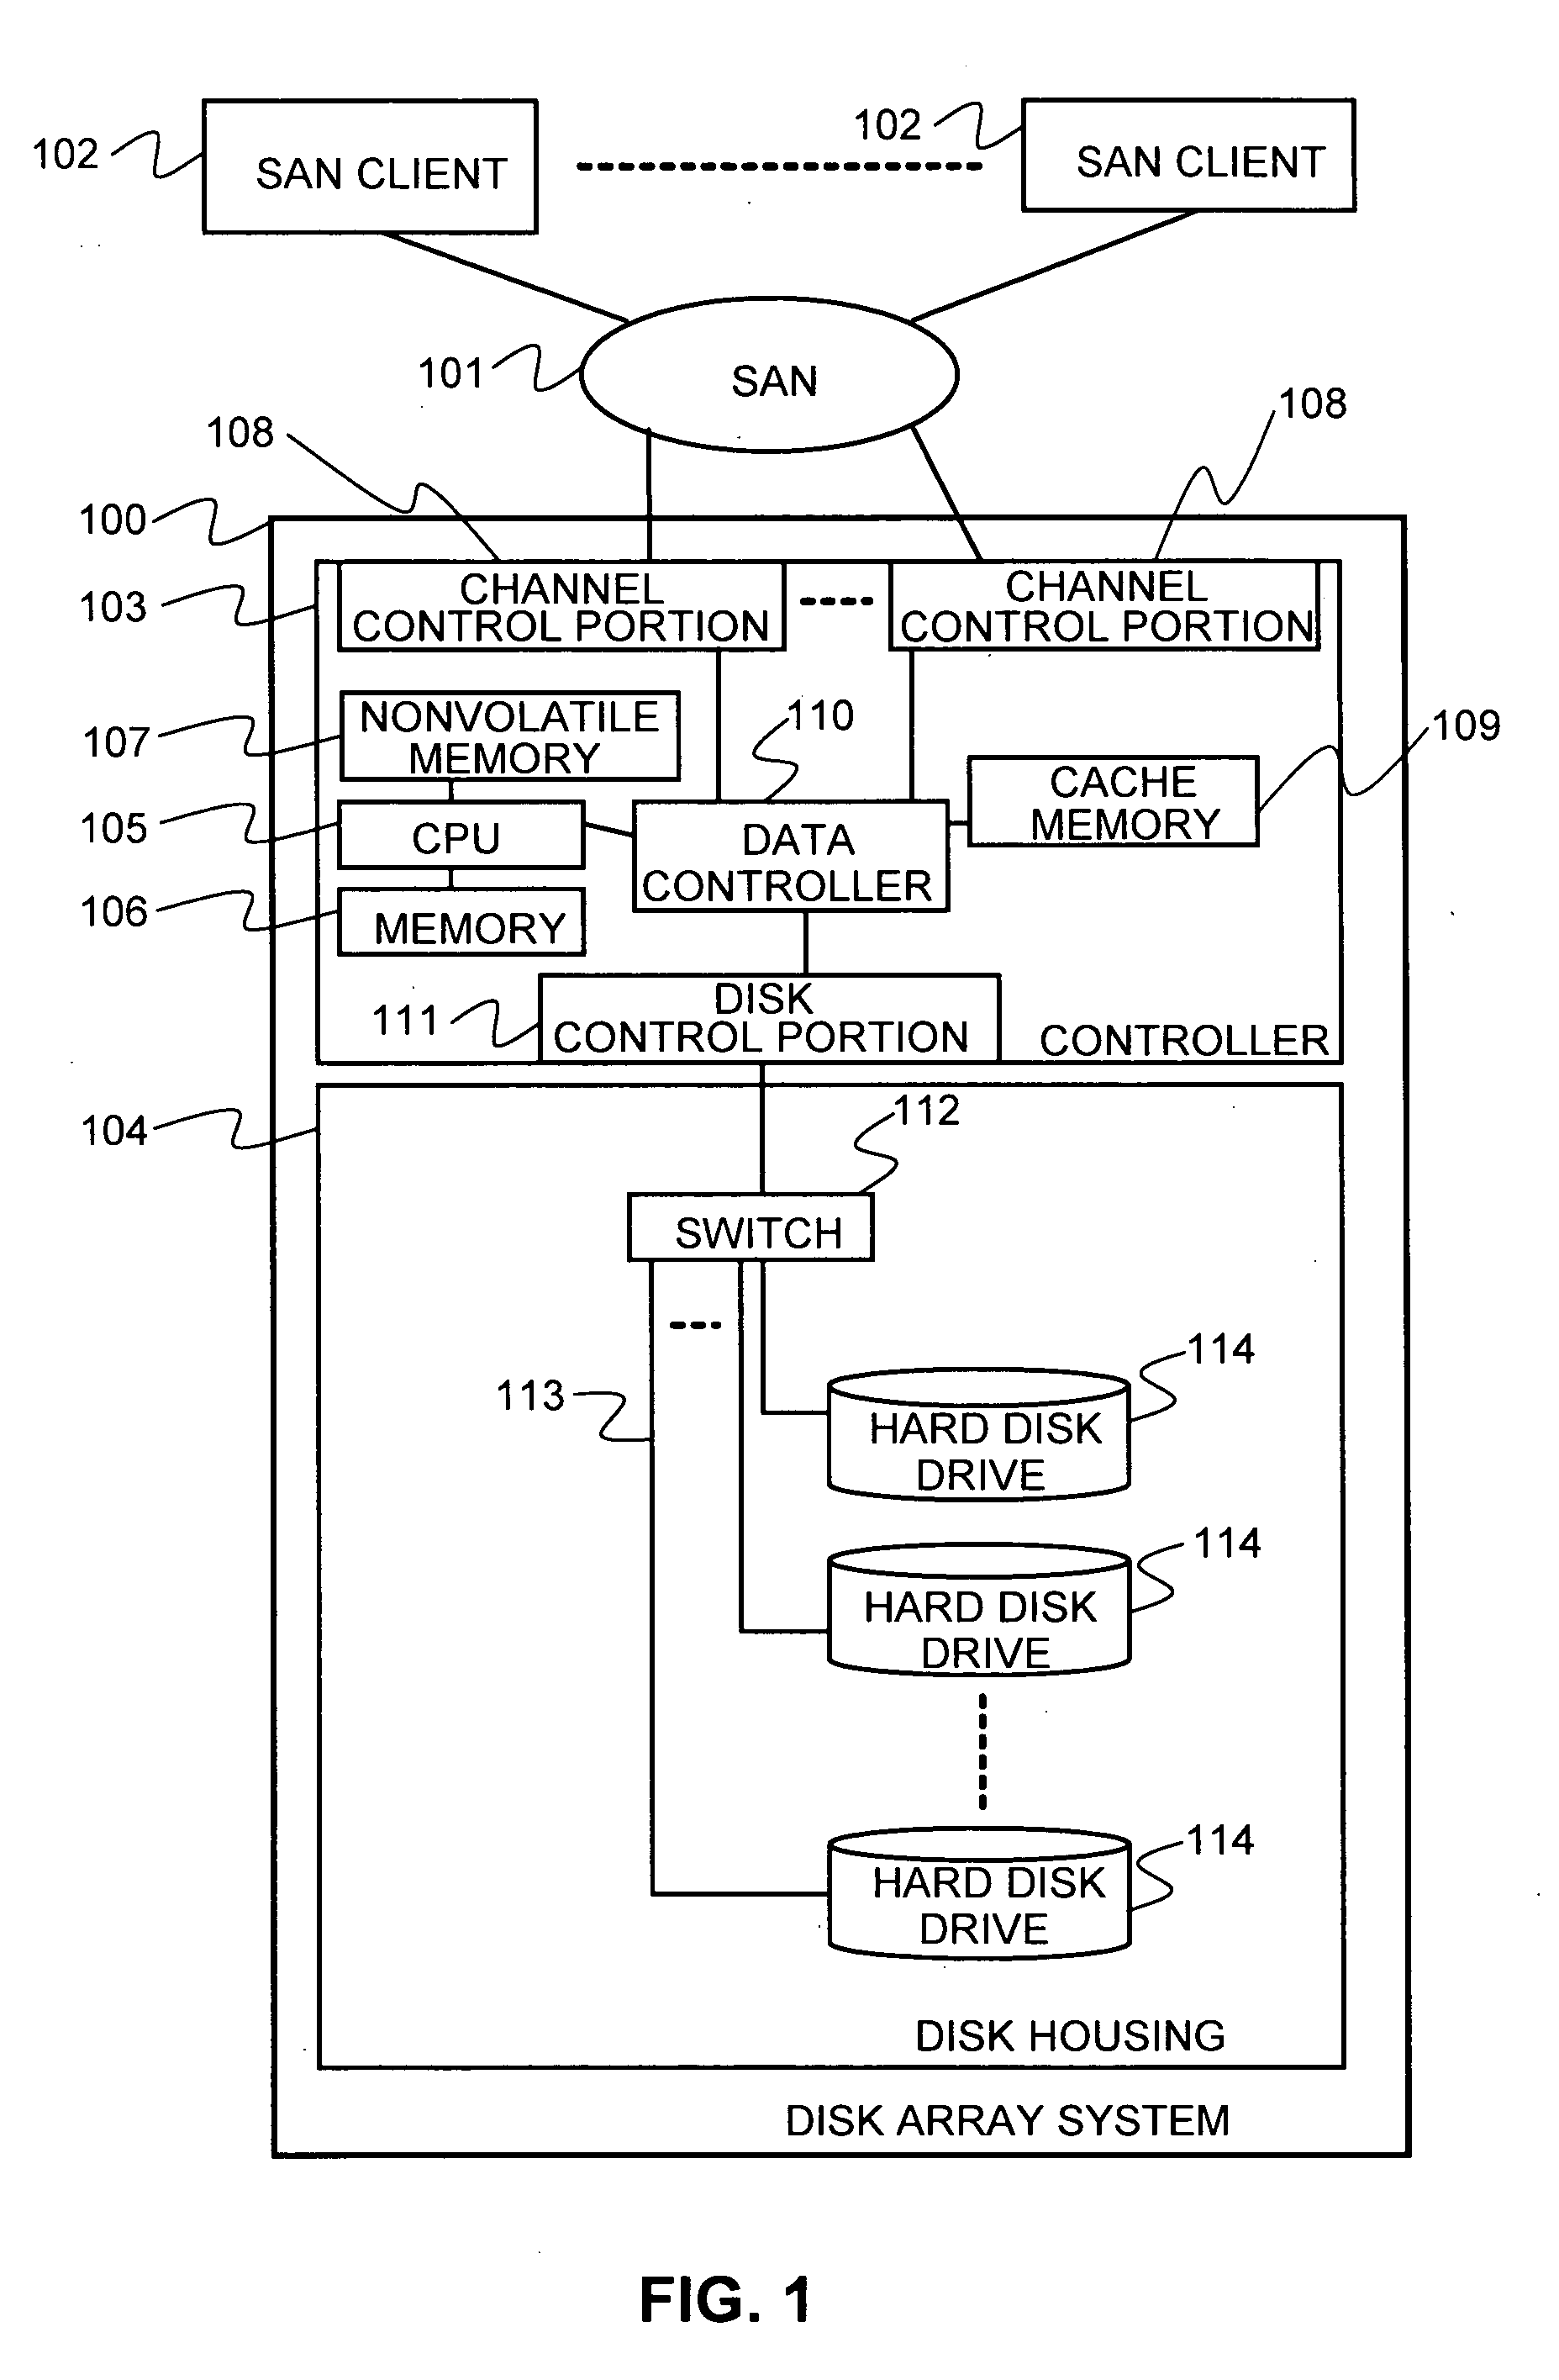 System and method for limiting access to a storage device